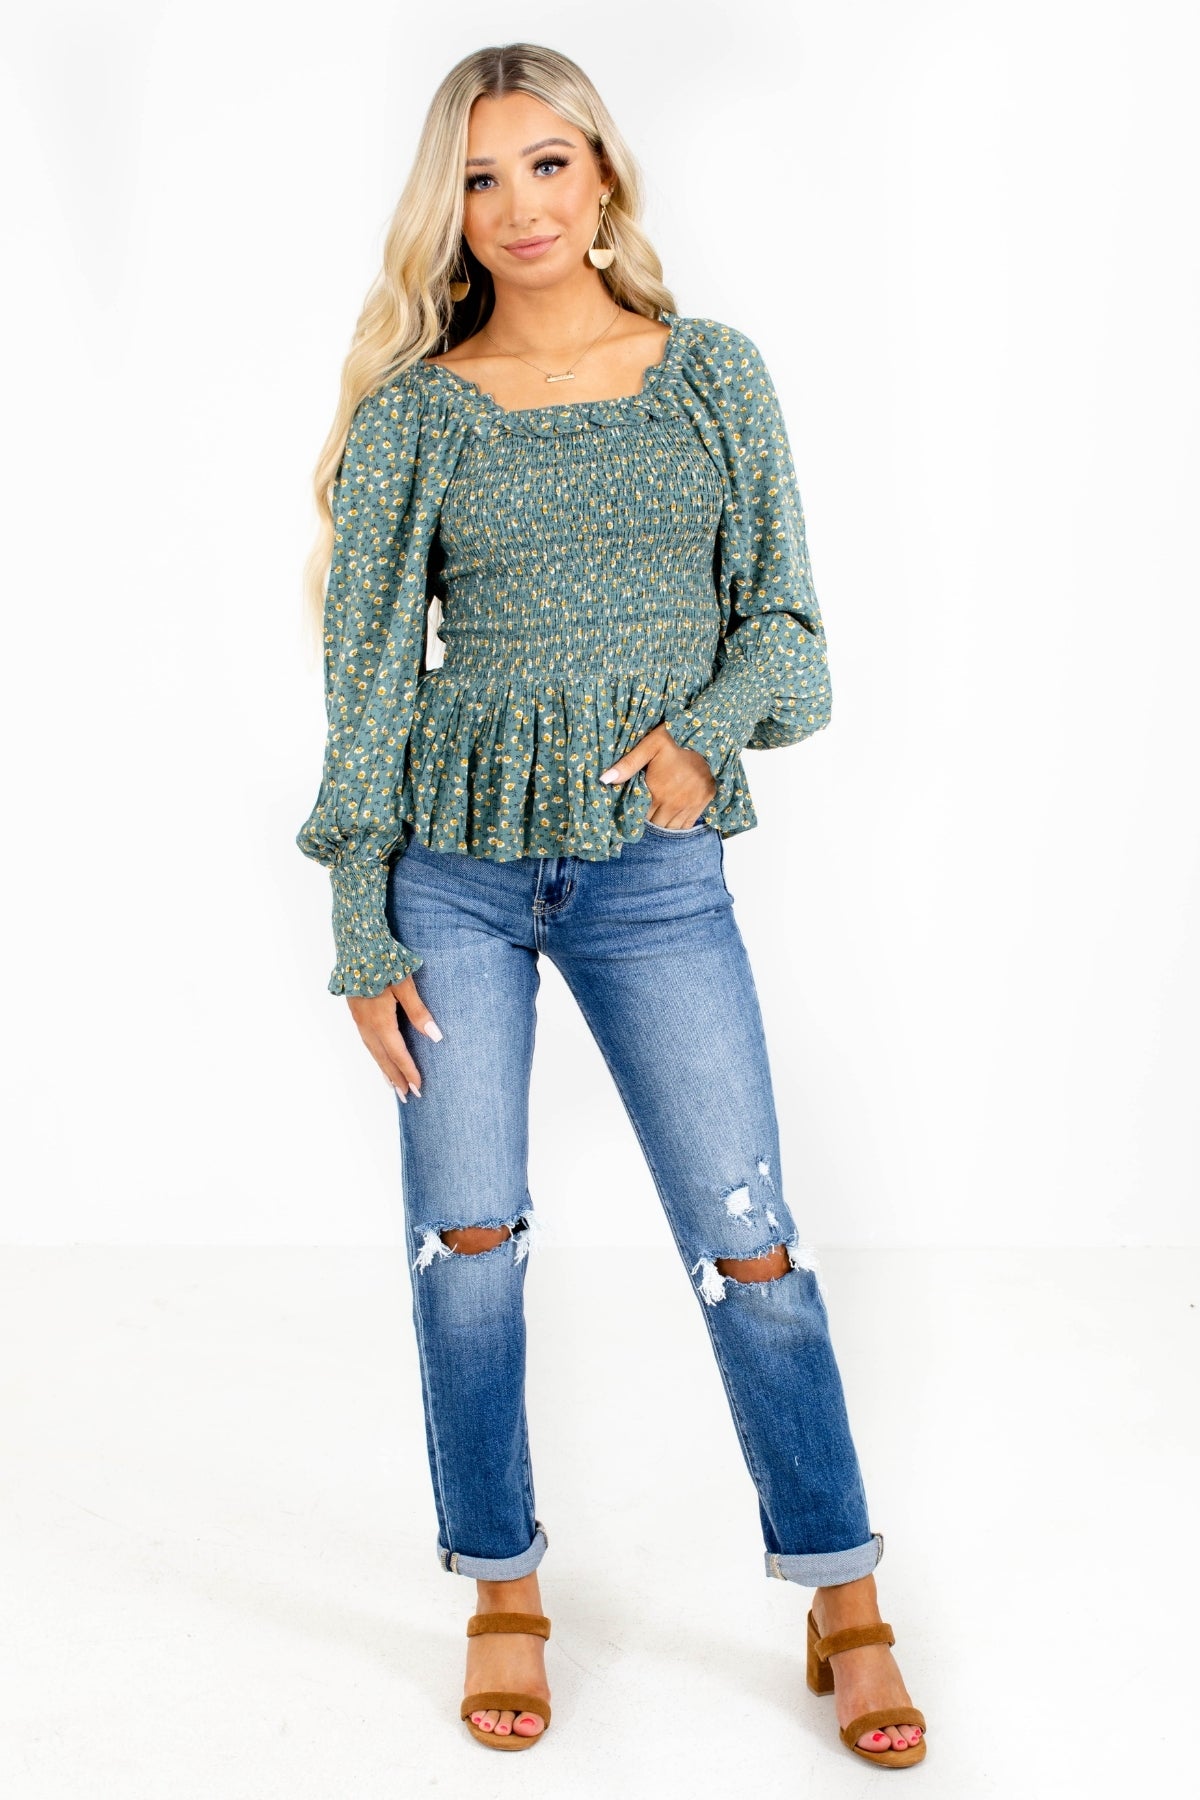 Jeans and Blouse Outfit From Bella Ella Boutique.